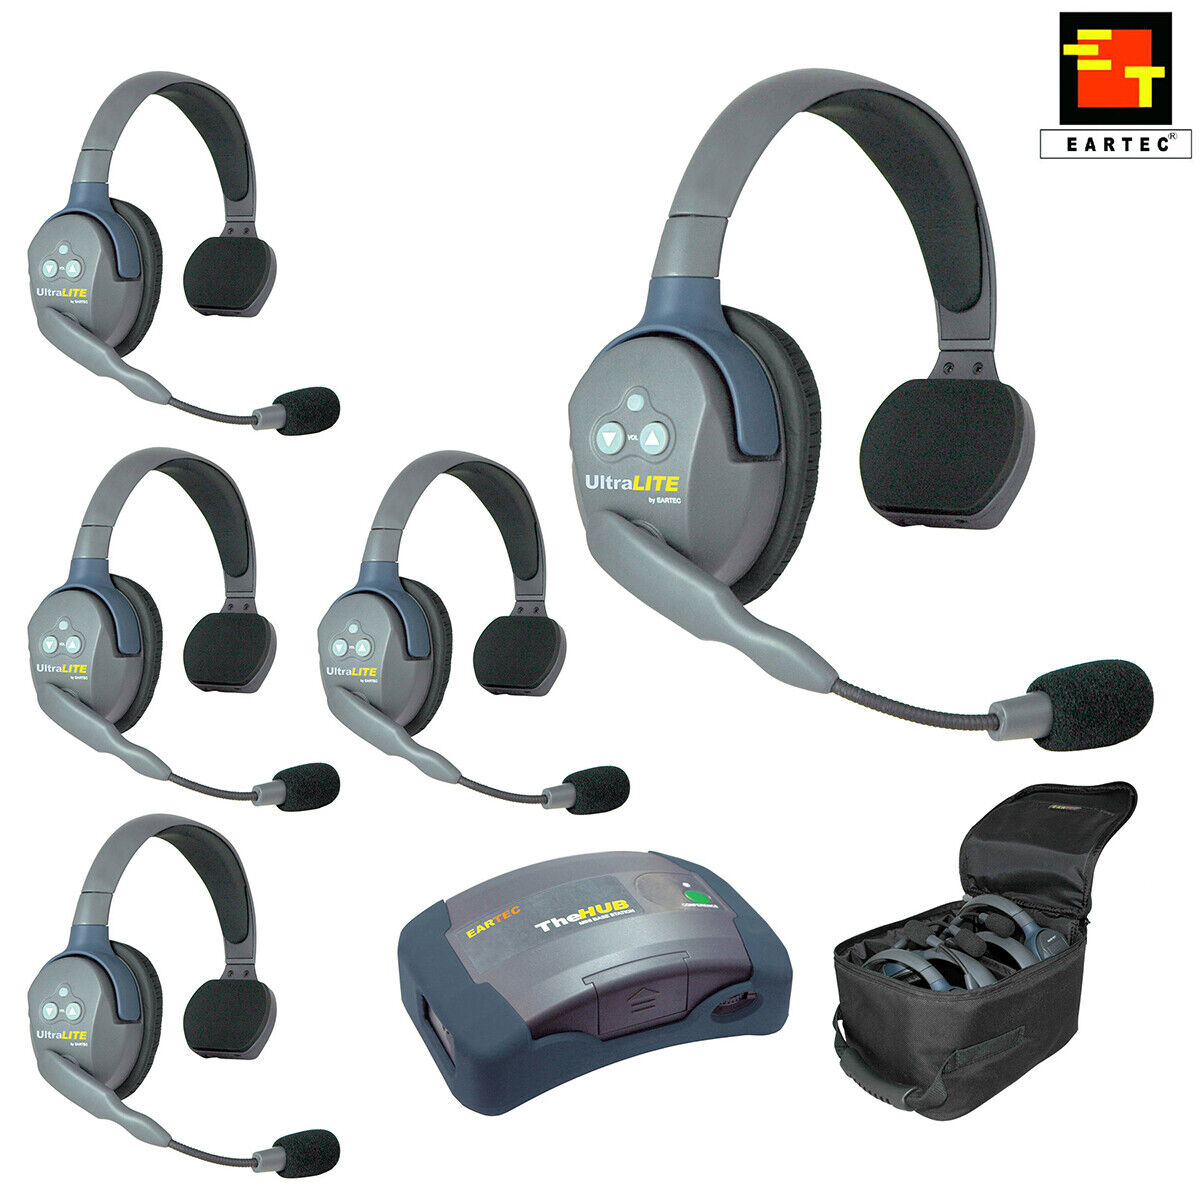 Eartec Headsets UltraLITE HD Ver. HUB Base Intercom System for 5 to 8 Person